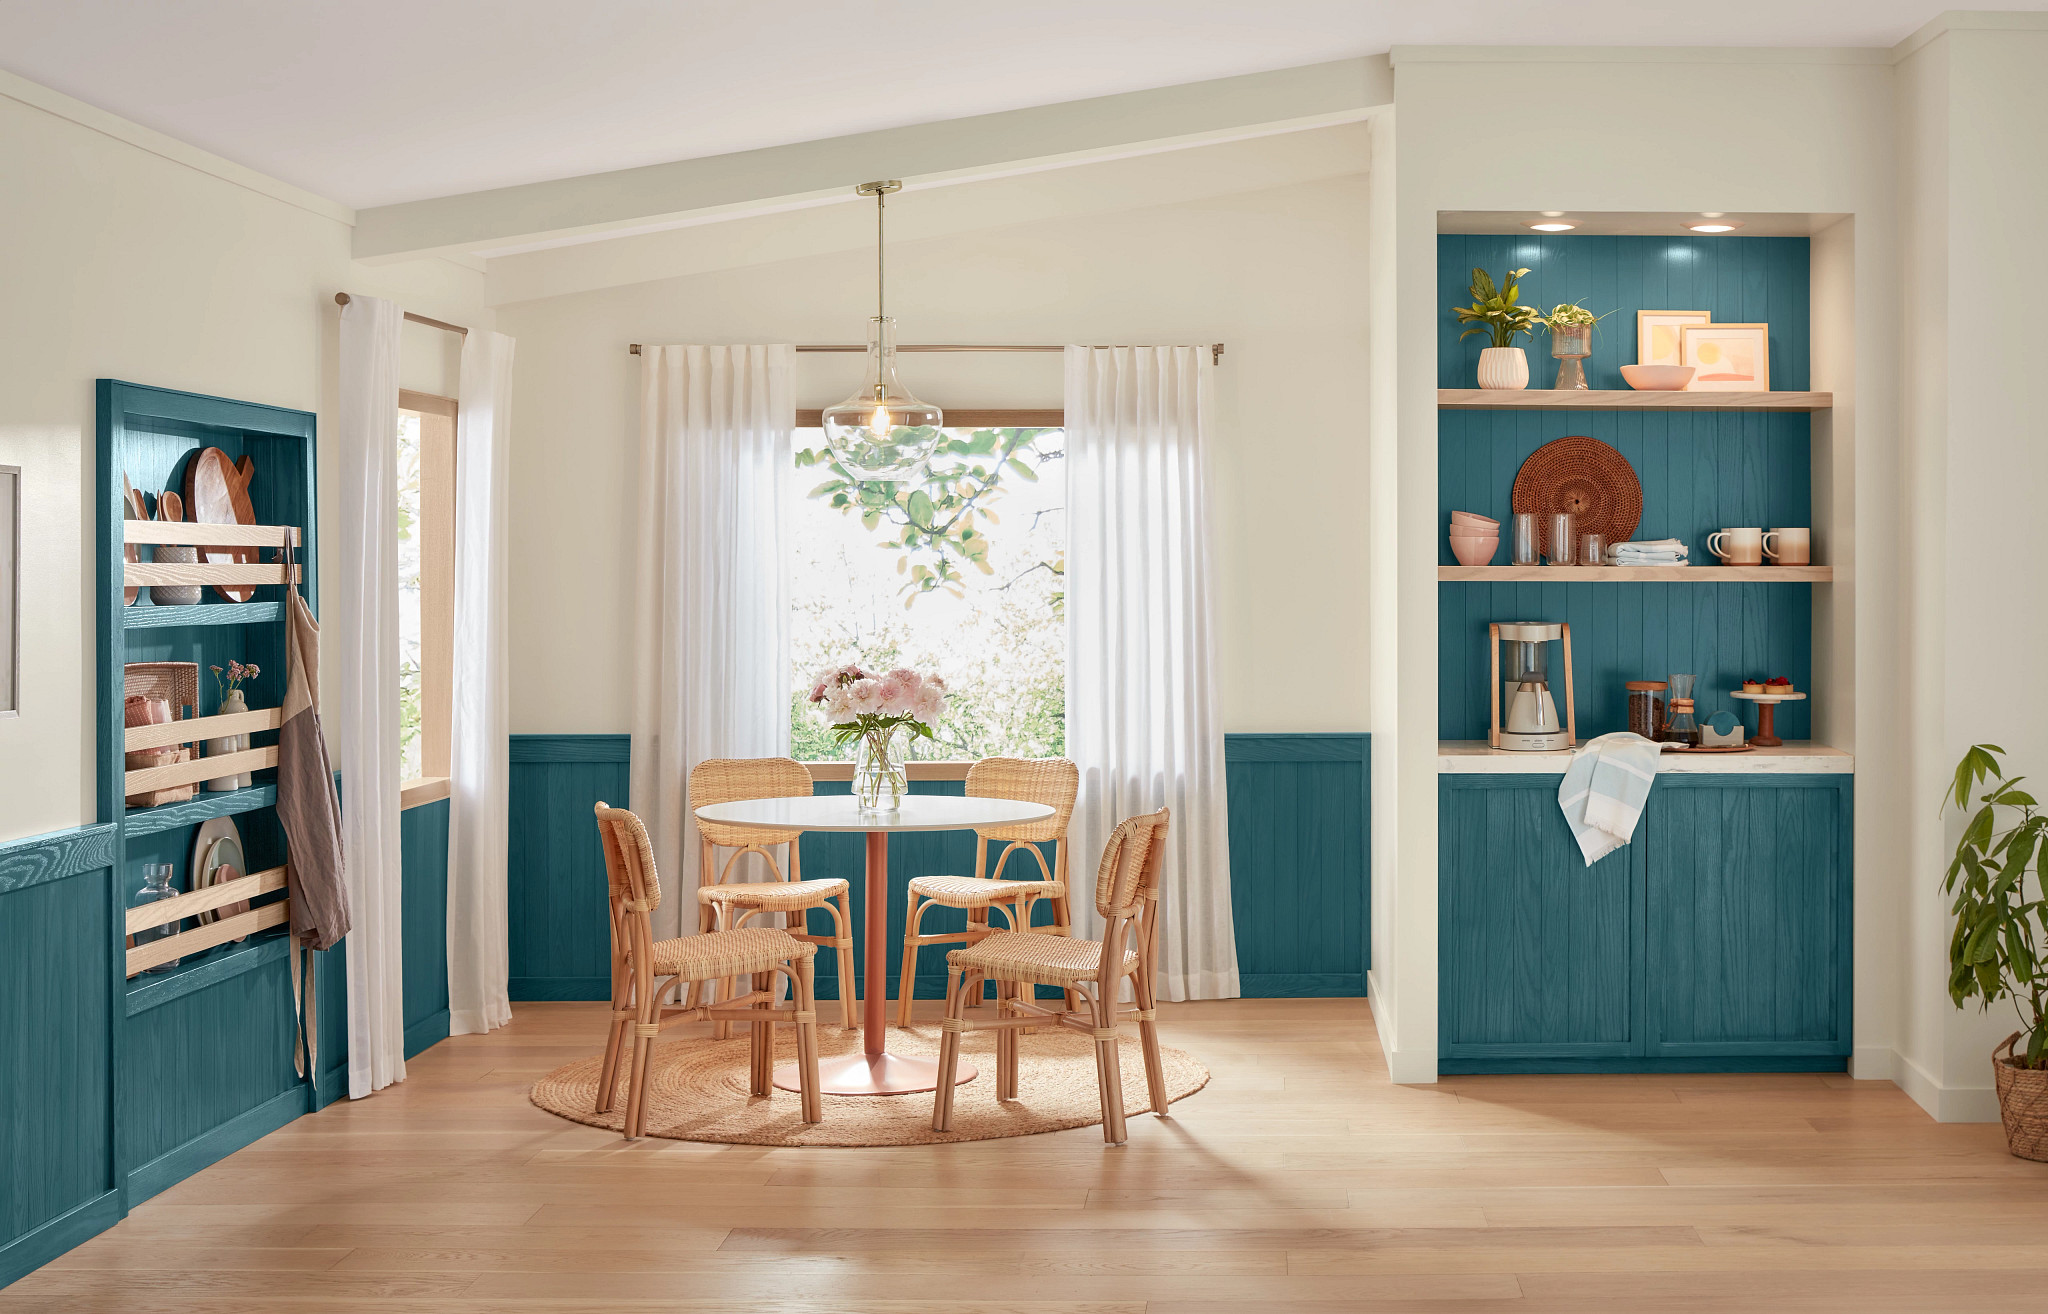 A natural colored breakfast nook is near teal colored kitchen cabinets